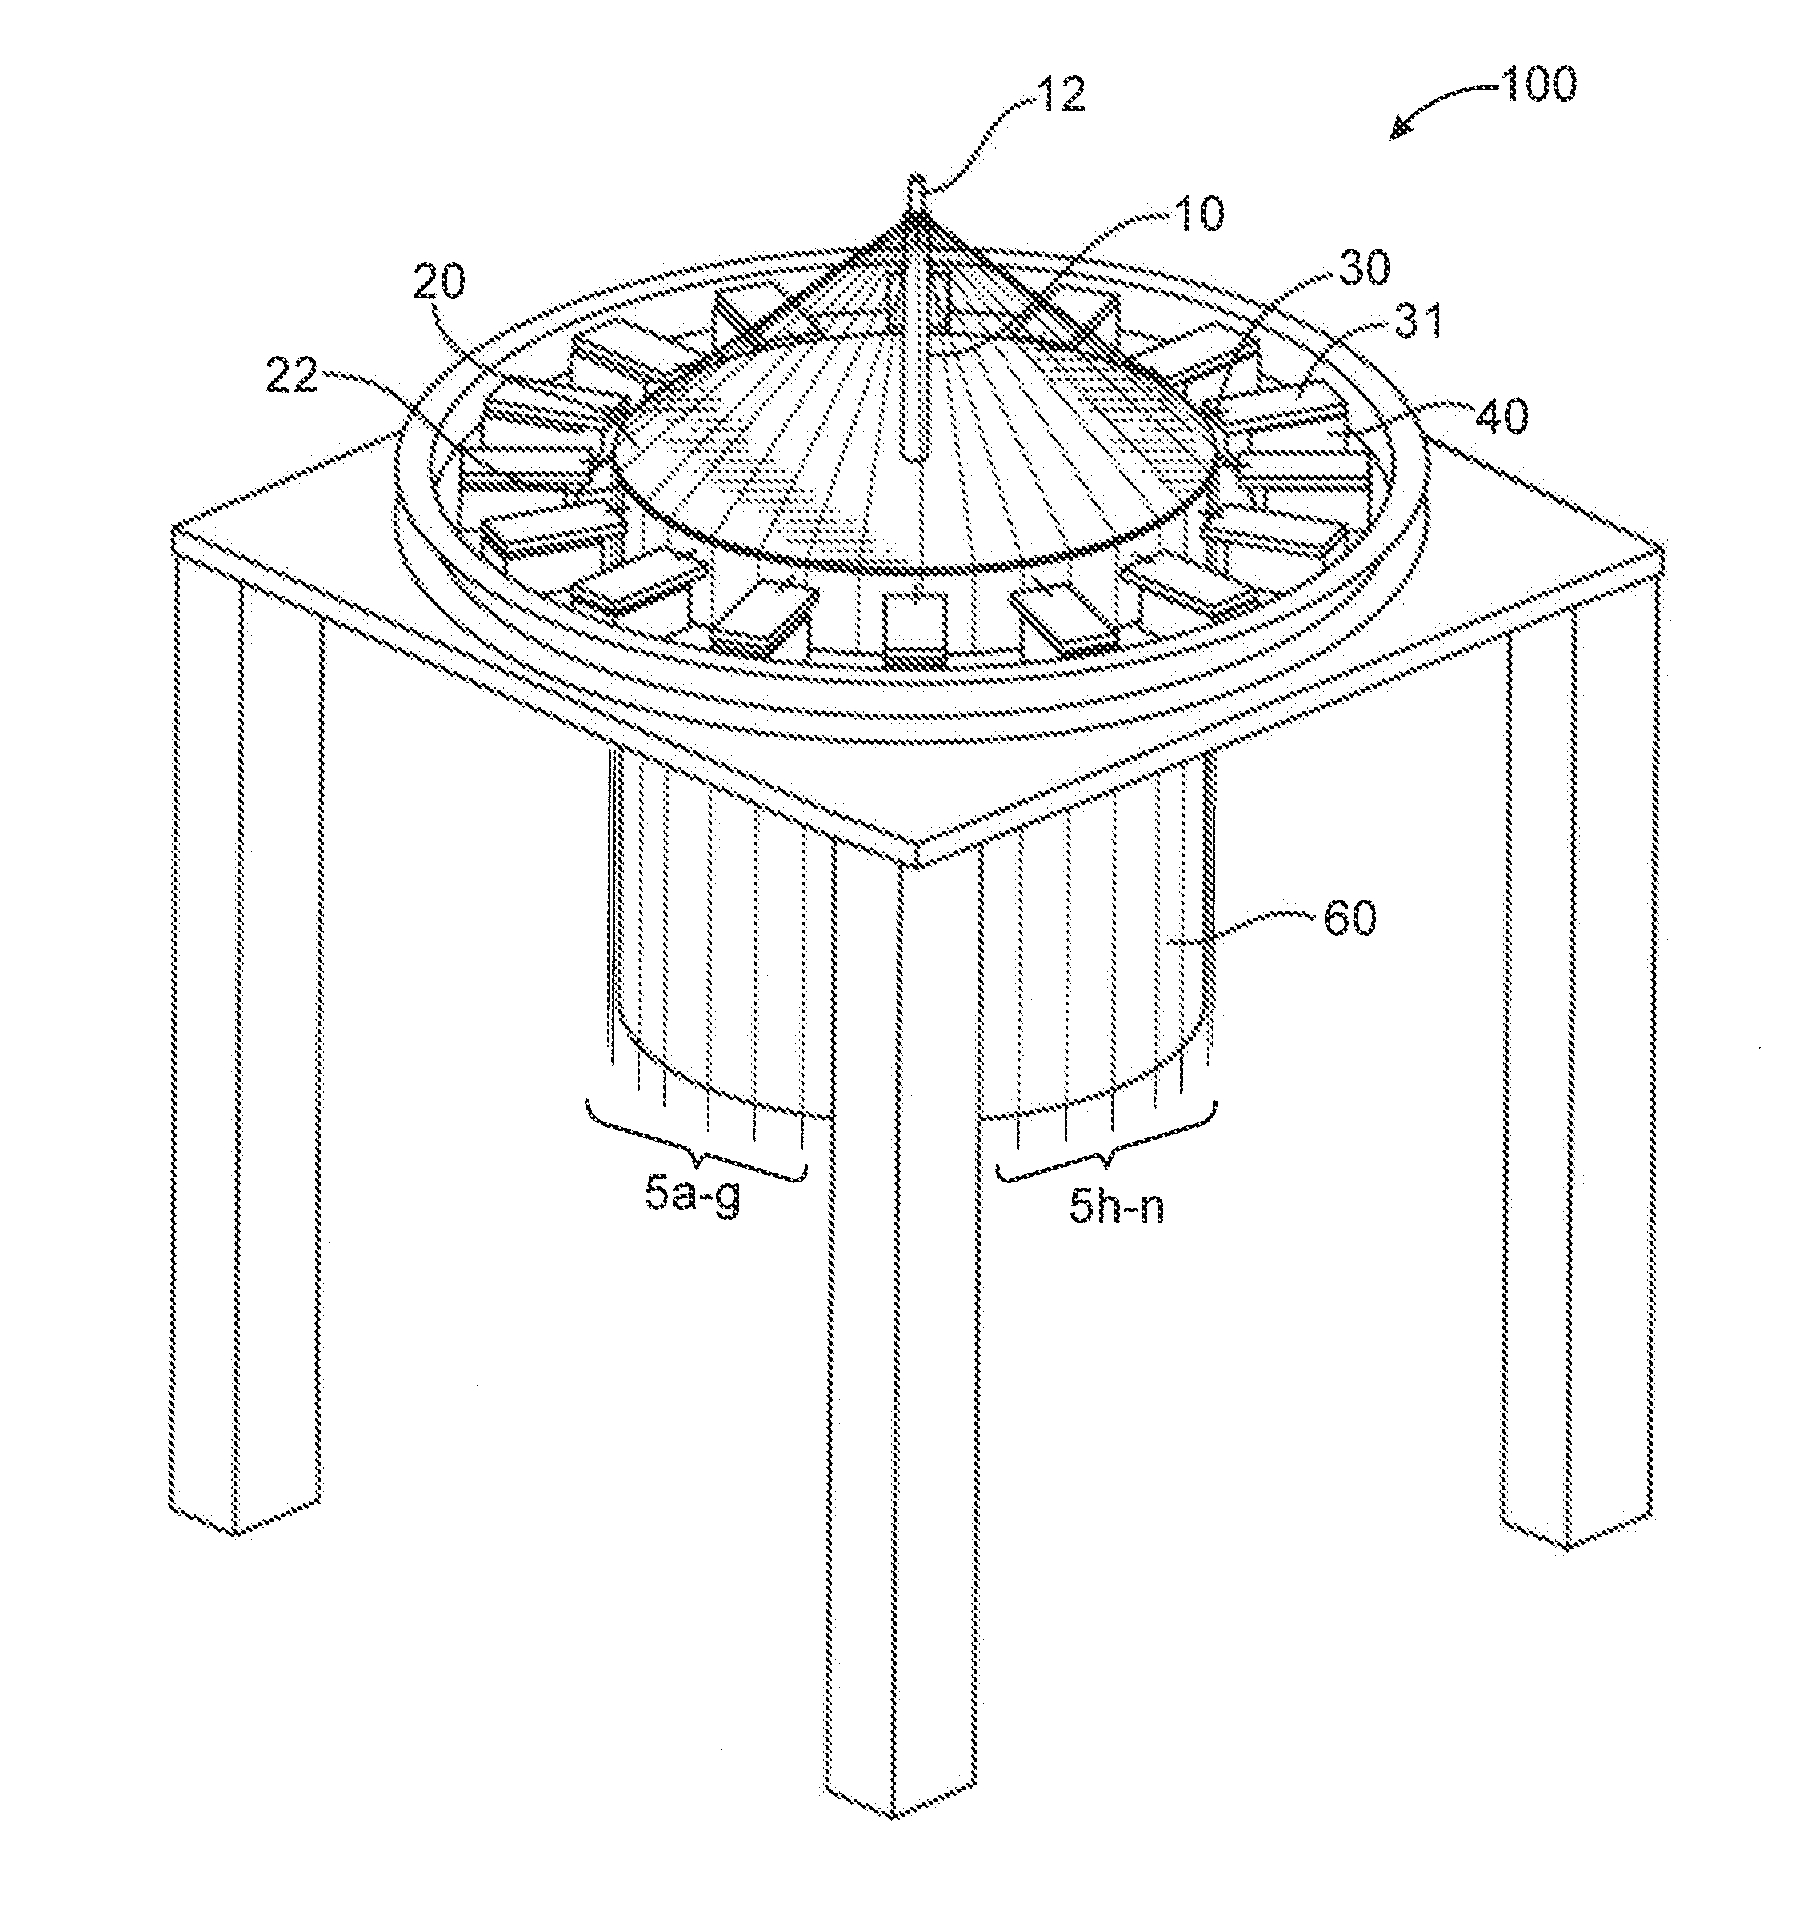 Braiding mechanism and methods of use